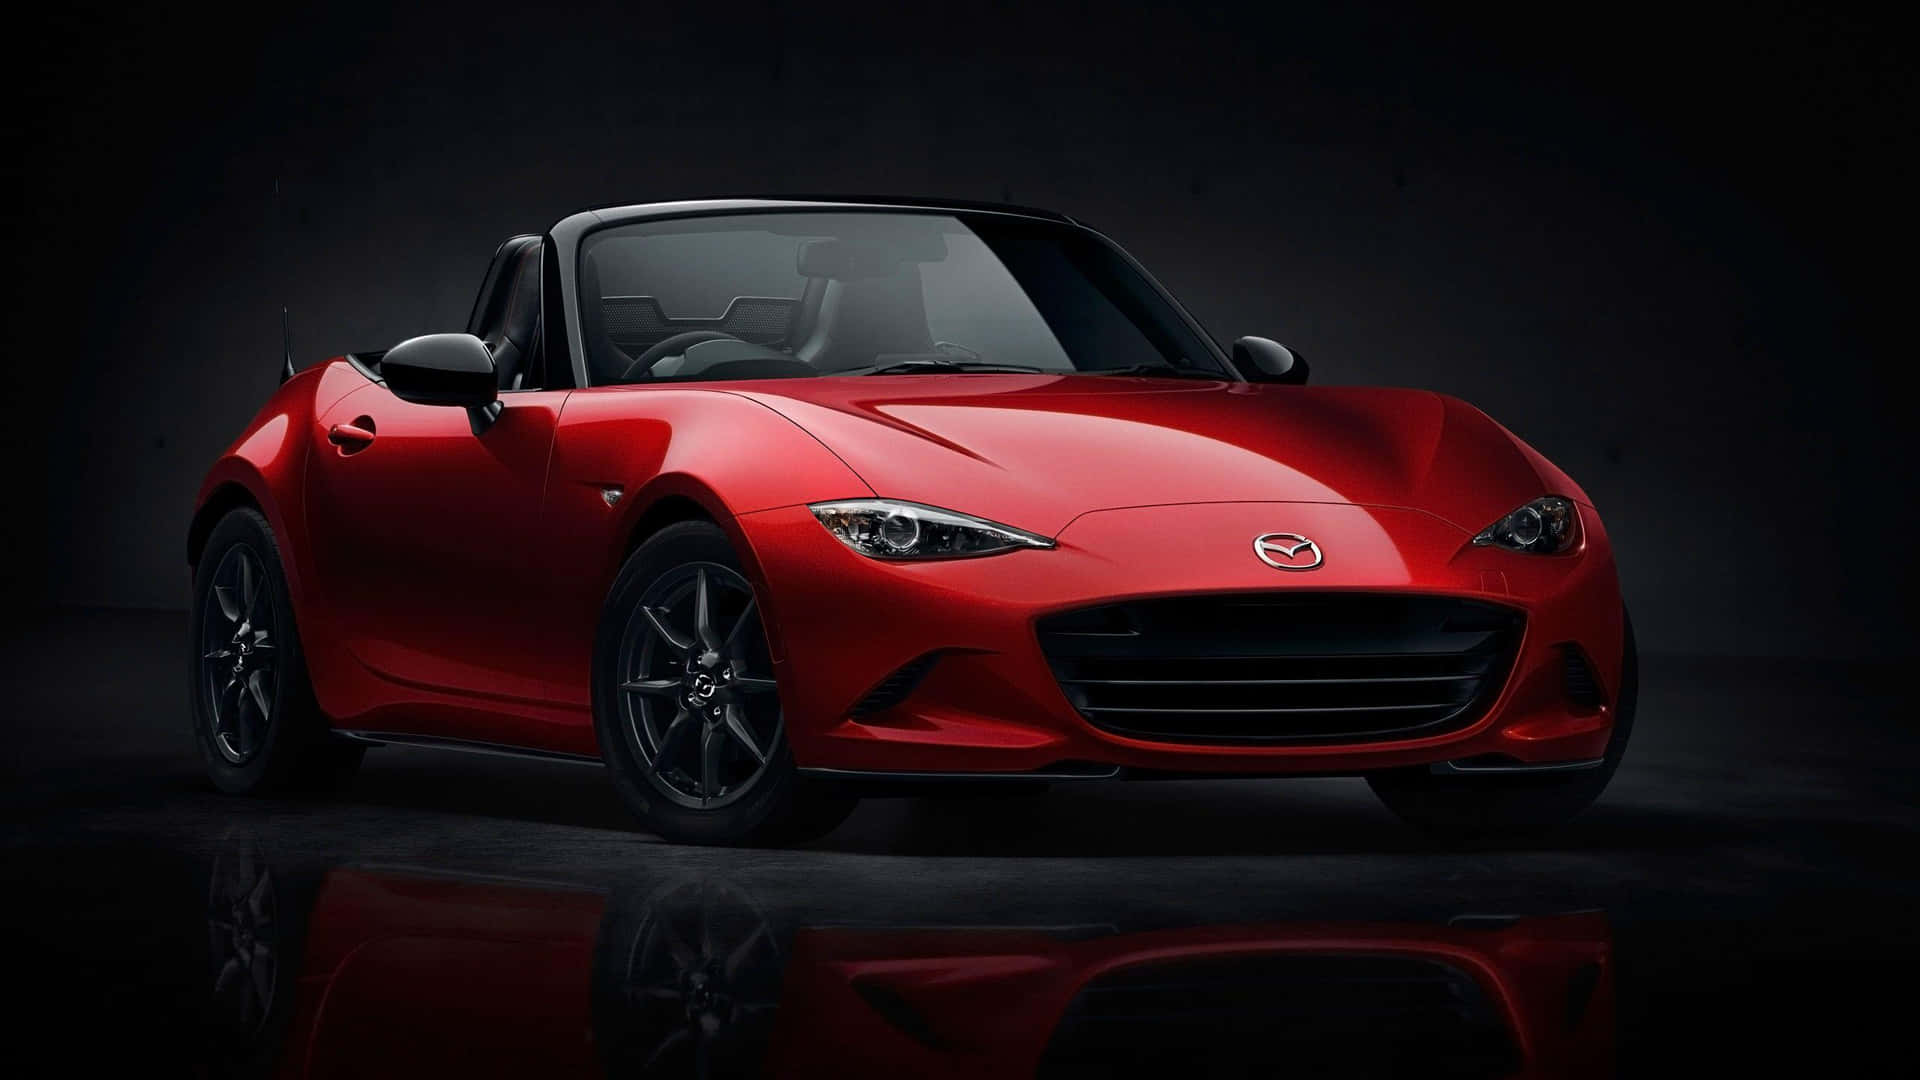 The Red Mazda Mx-5 Roadster Is Shown In A Dark Room Wallpaper